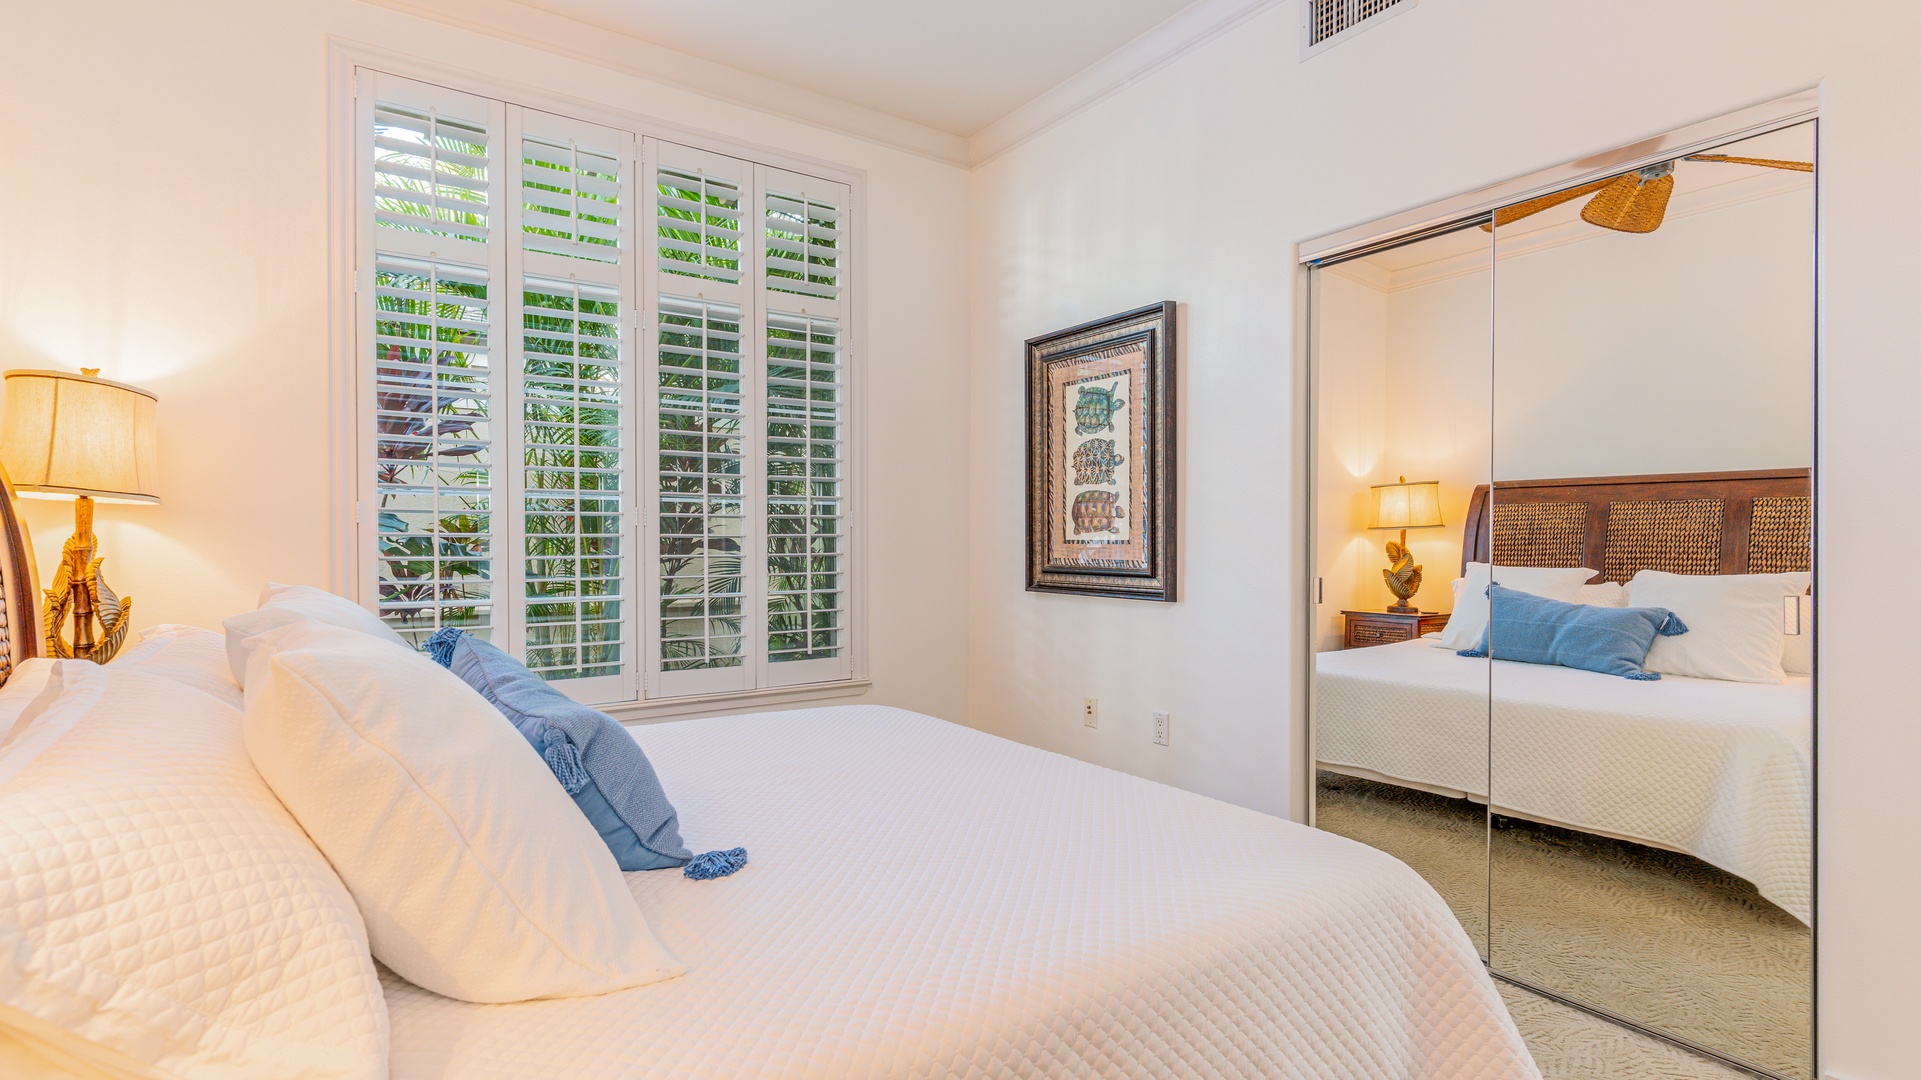 Kapolei Vacation Rentals, Kai Lani 24B - The third guest bedroom with cozy surroundings and soft linens.